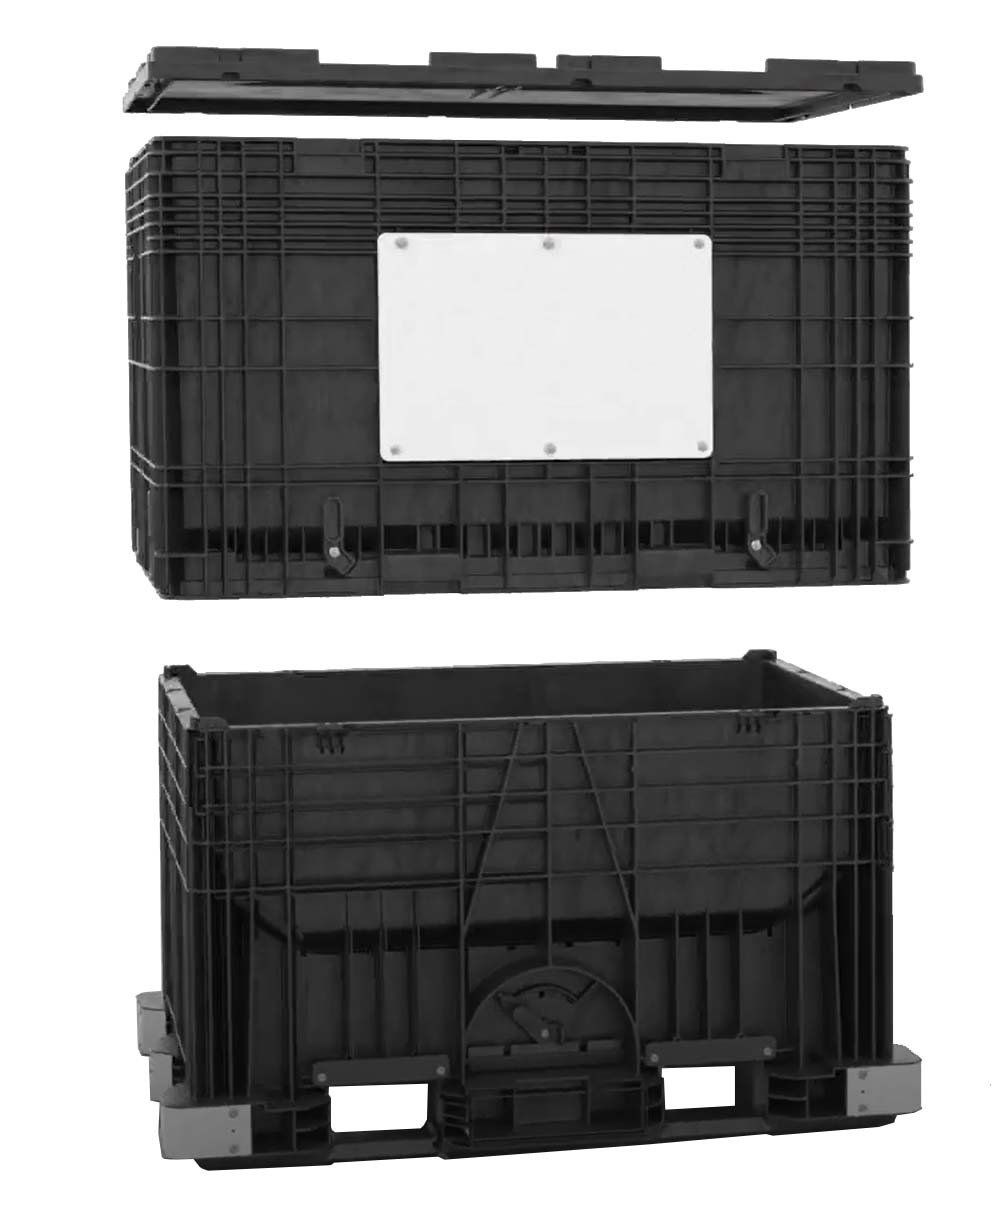 CenterFlow Seed Boxes